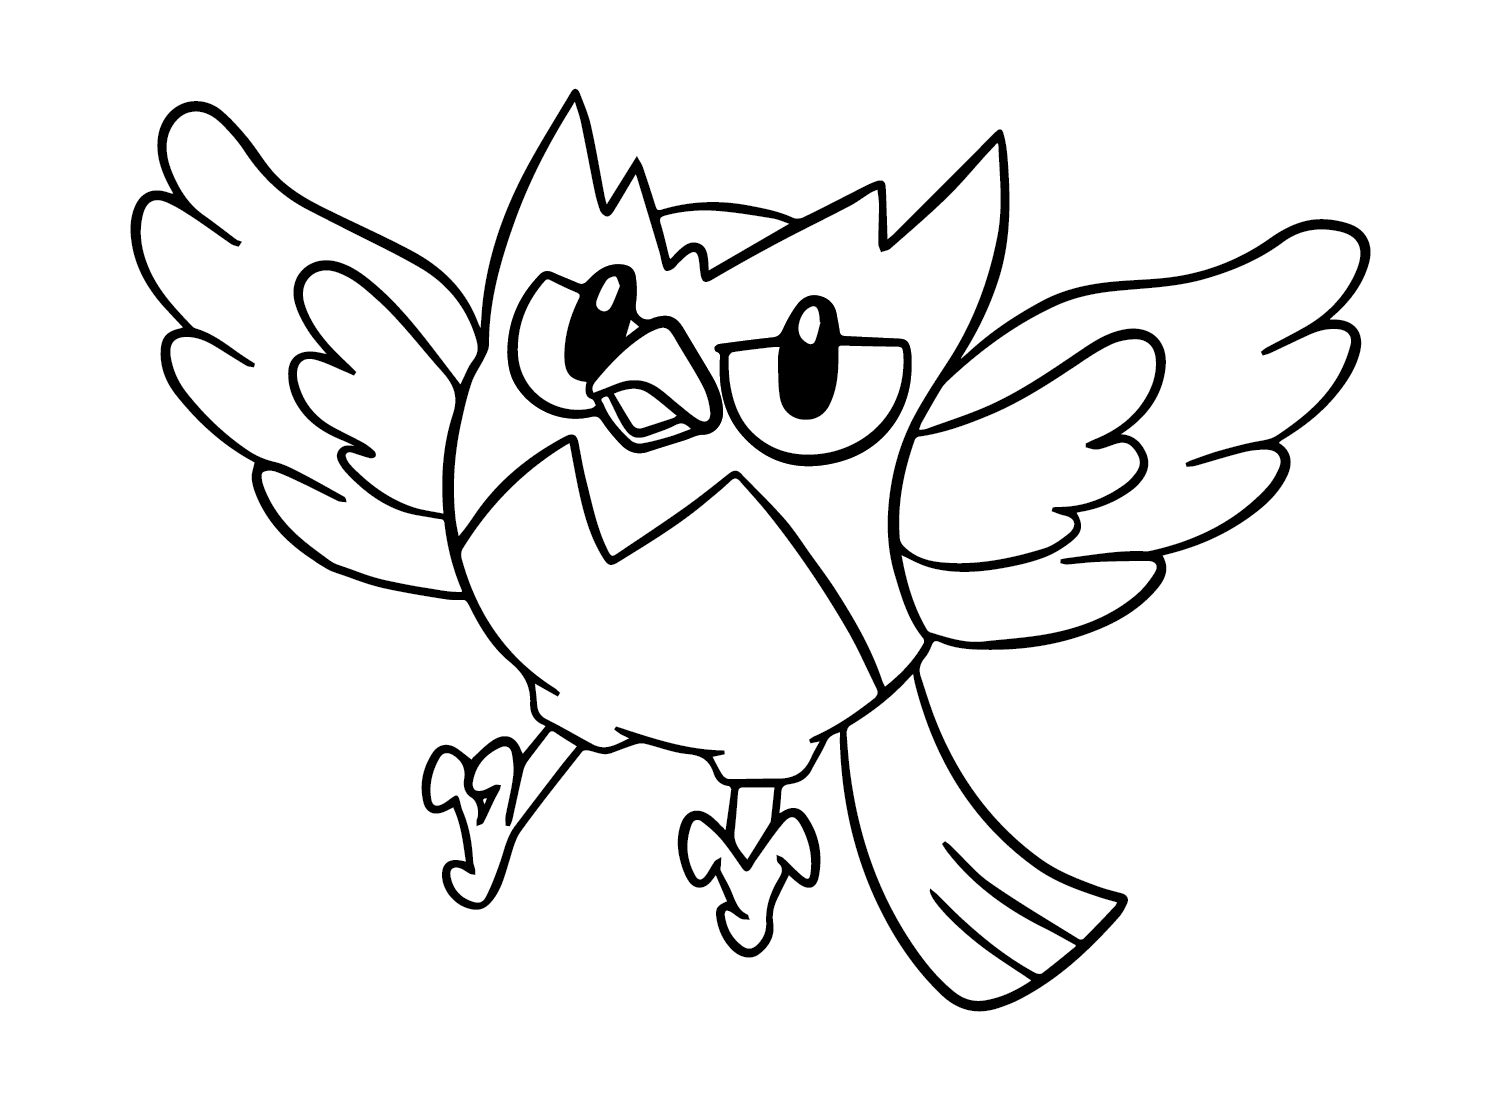 The Pokemon Rookidee Coloring Page